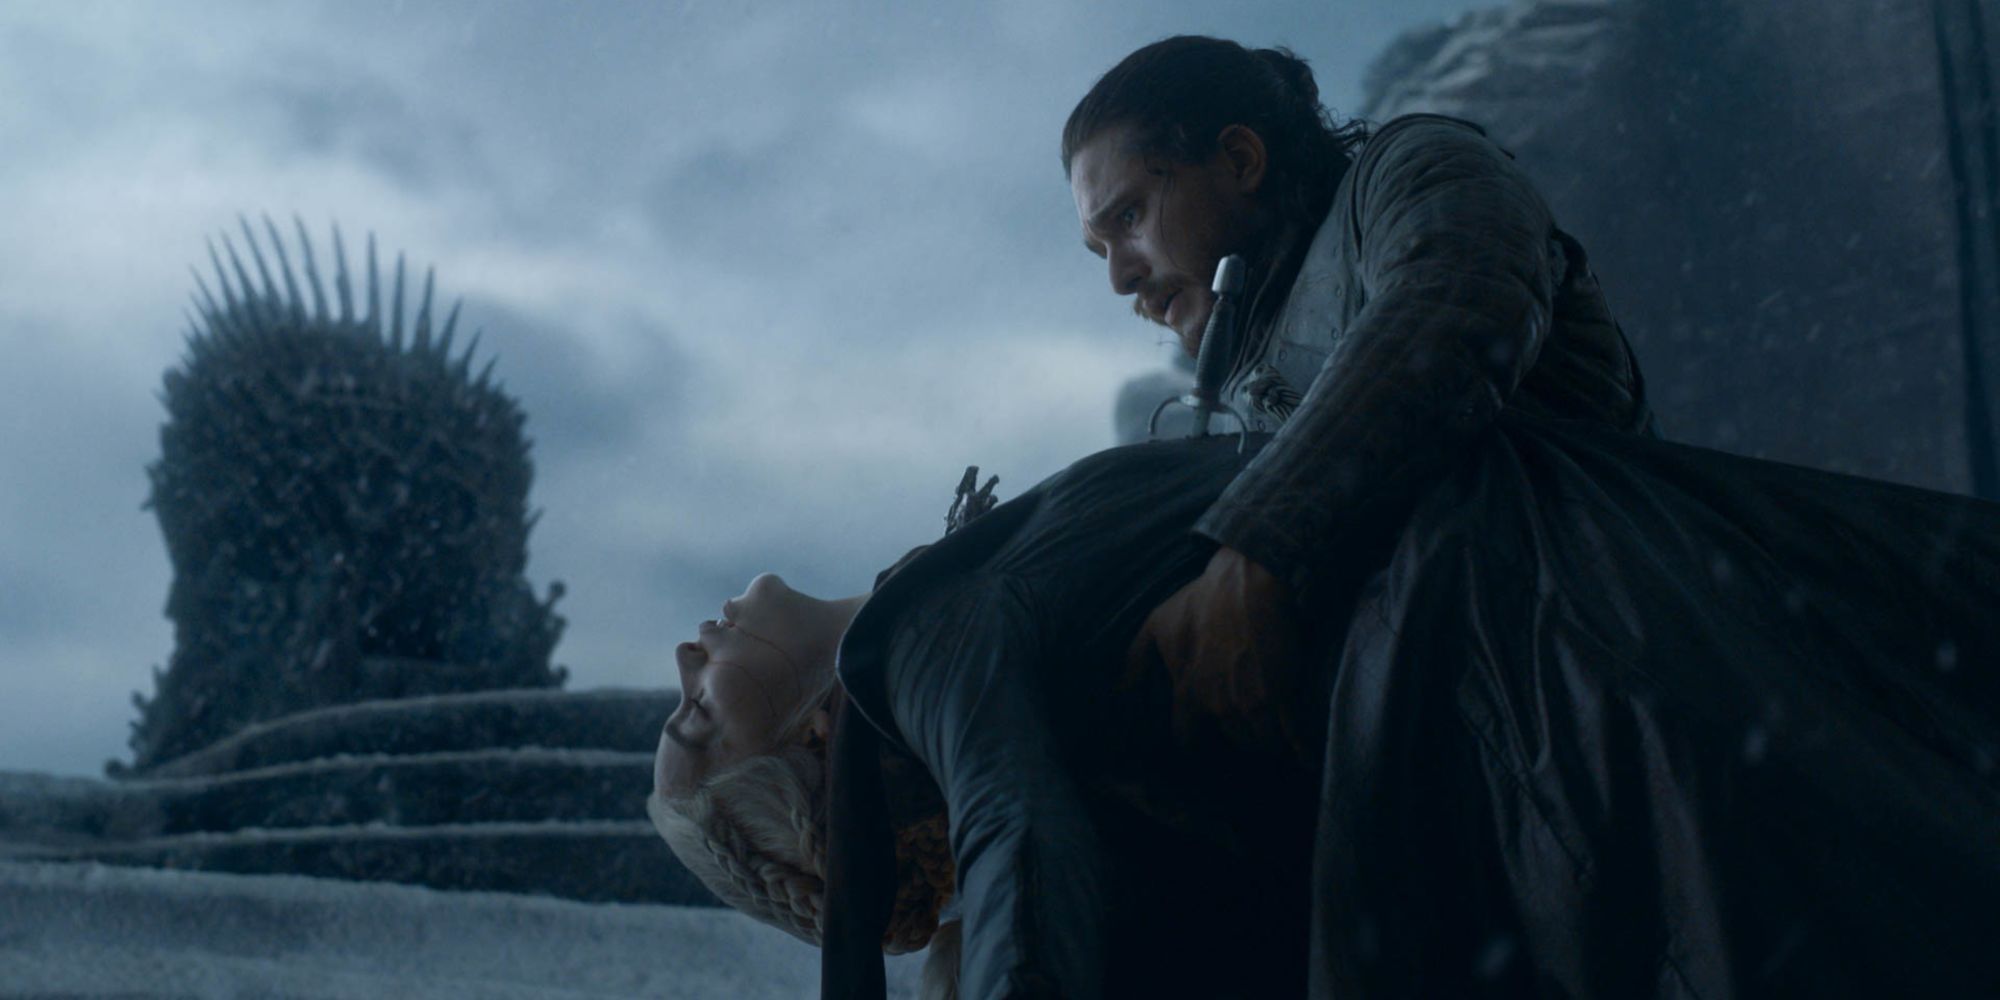 Jon Snow holding Daenerys' dead body in front of the Iron Throne in Game of Thrones' series finale